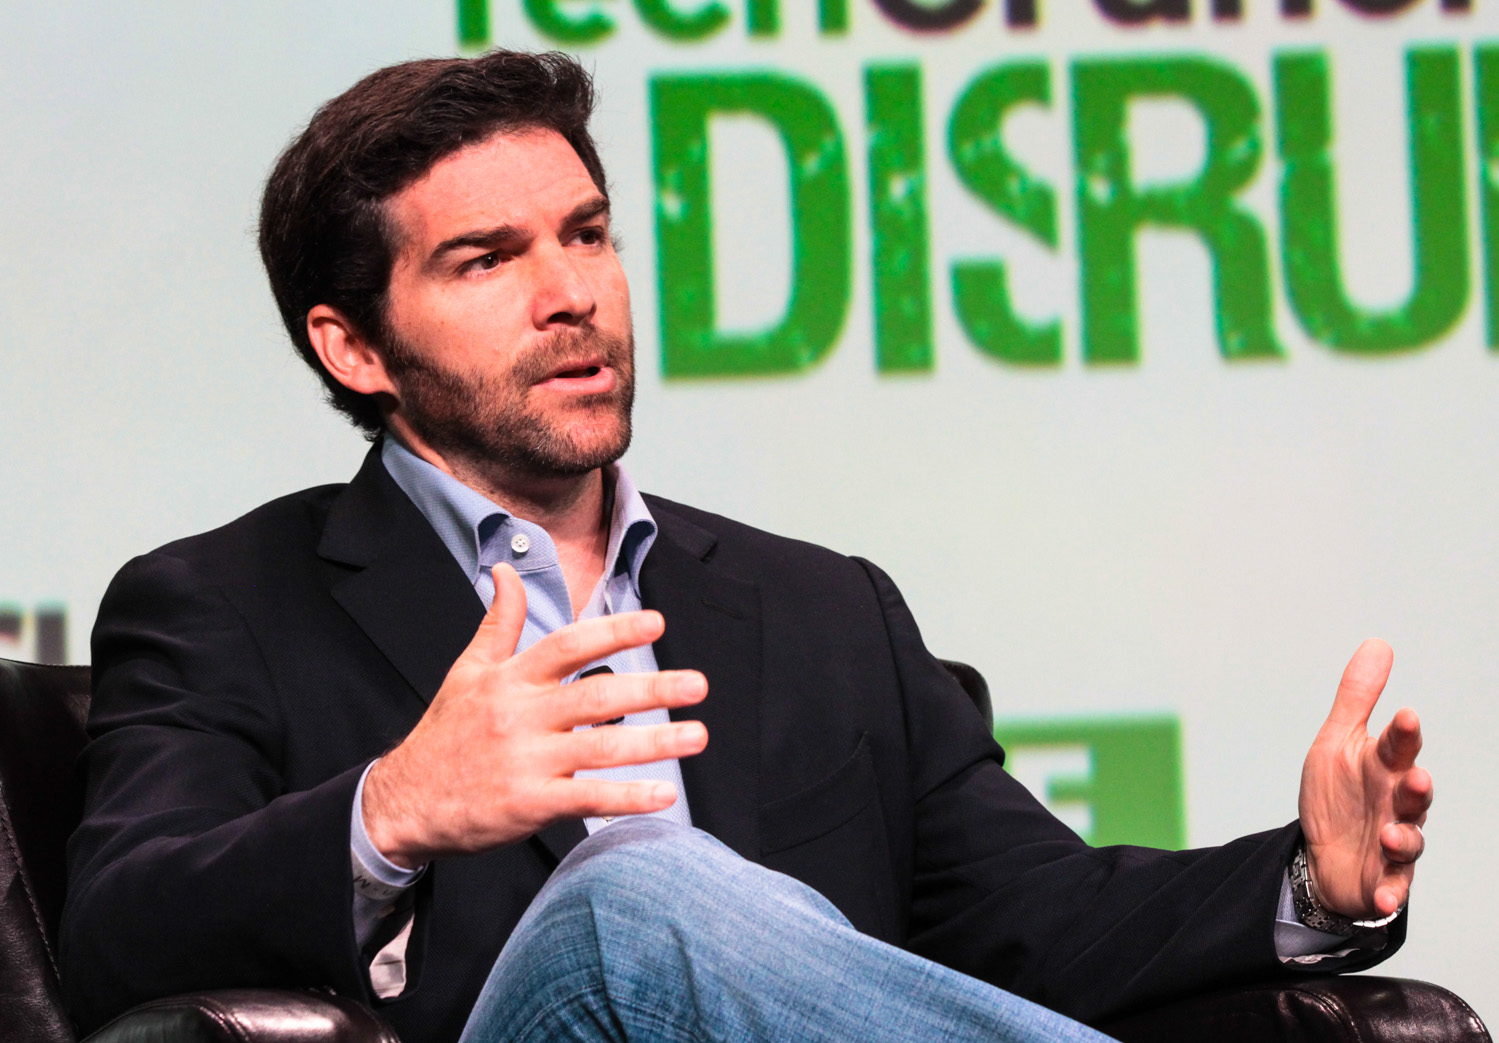 Jeff Weiner to Step Down as LinkedIn’s CEO in June